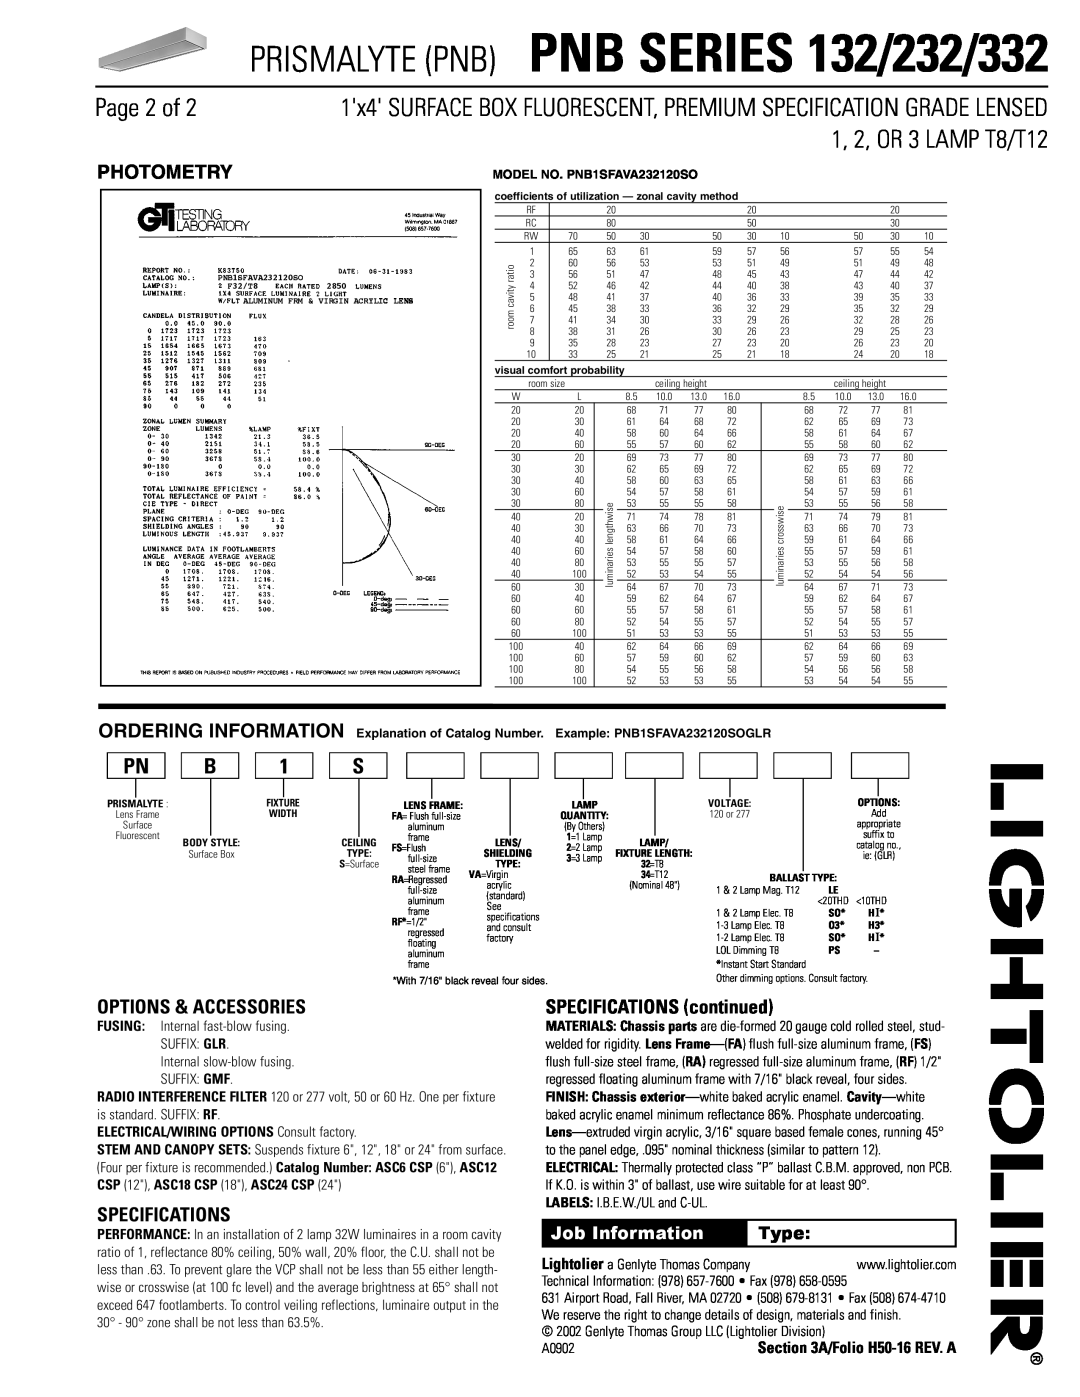 Lightolier PNB SERIES 232 Page 2 of, Options & Accessories, Specifications, SPECIFICATIONS continued, Pn B, Photometry 